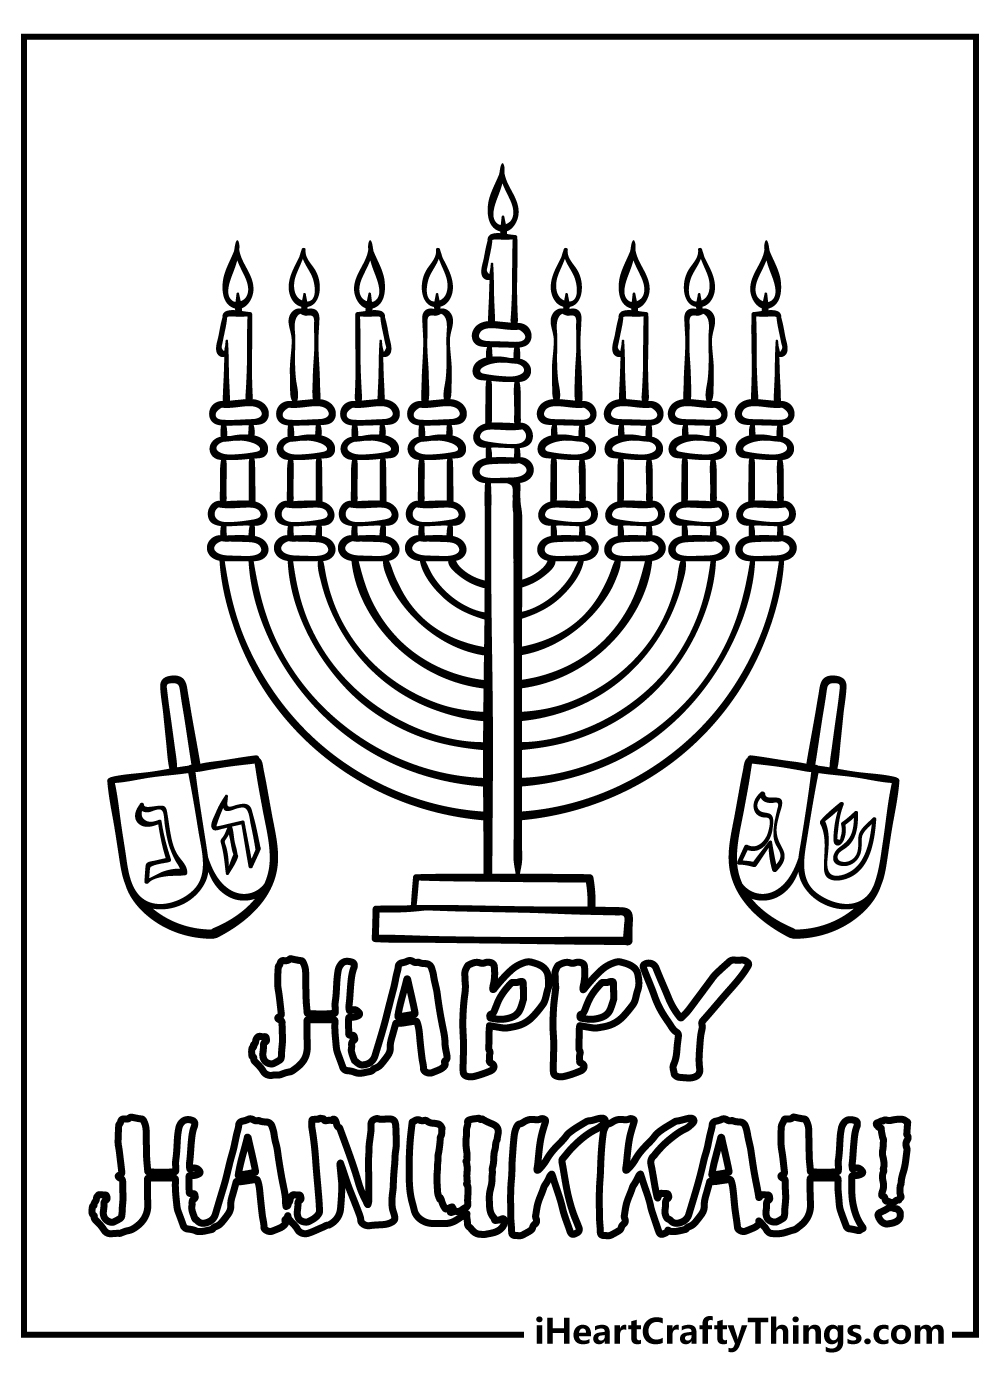 Hanukkah Coloring Pages for adults free printable